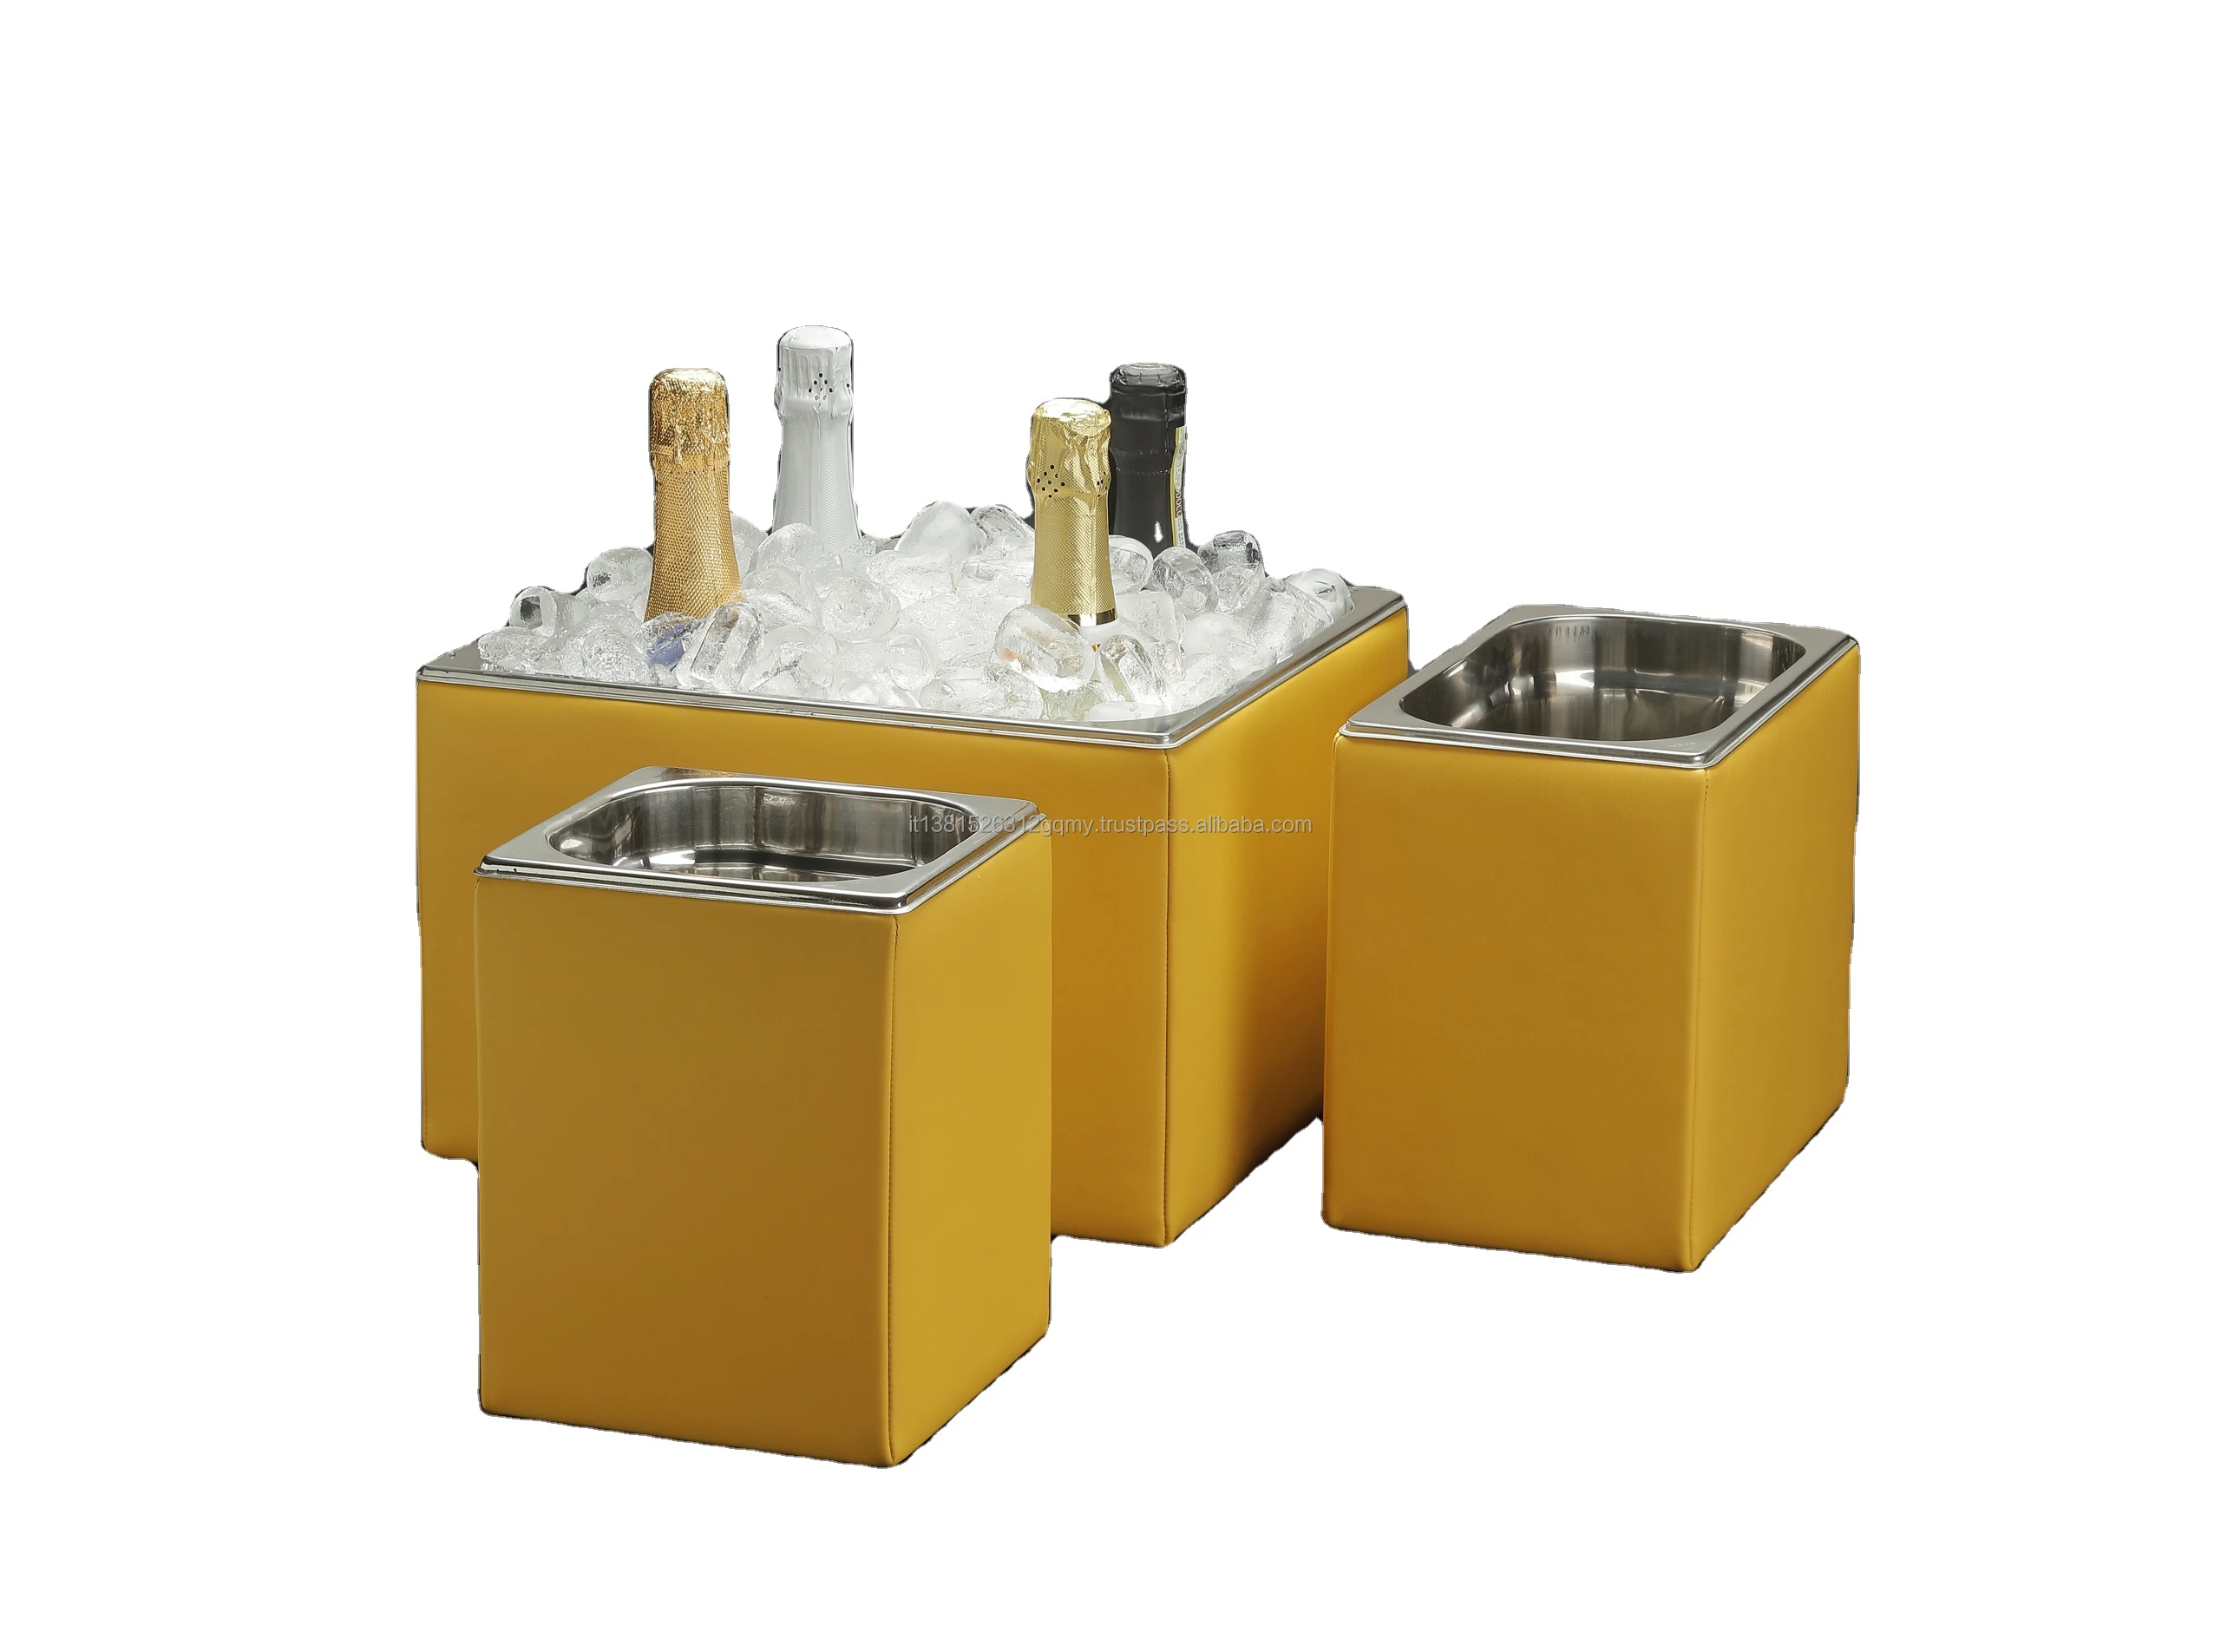 Wine Luxury Amber Glacette Ice Bucket Wine Holder 1 Bottle Made In Italy Design Elm Wood Stainless Steel And Leather Cover